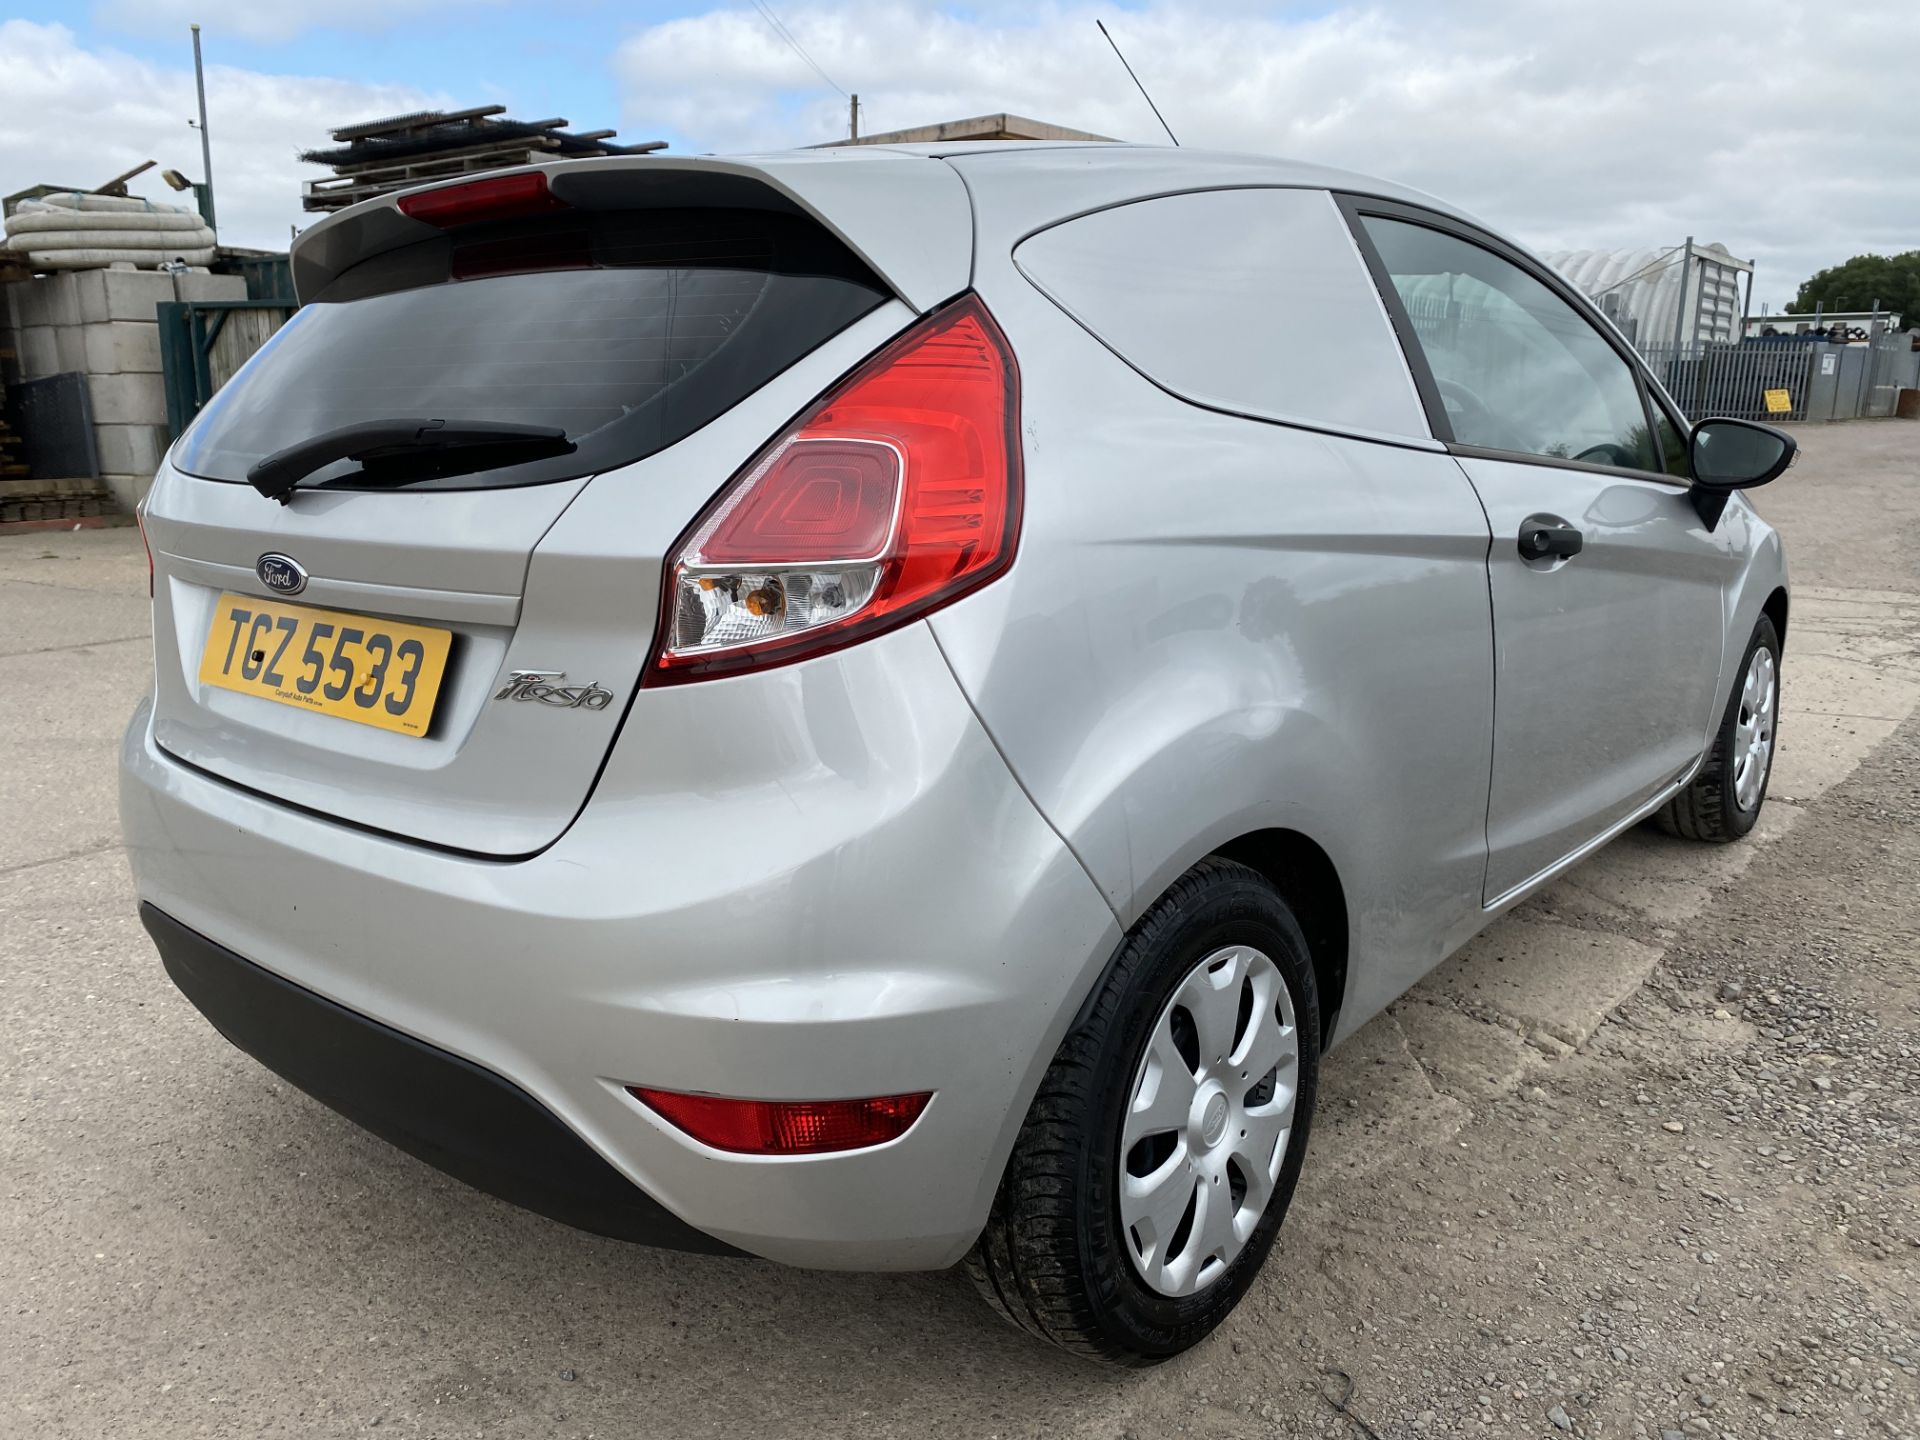 FORD FIESTA 1.5'TDCI' ECONETIC - (66 REG) 1 OWNER - AIR CON - SILVER -NEW SHAPE - LOOK!!! - Image 13 of 24